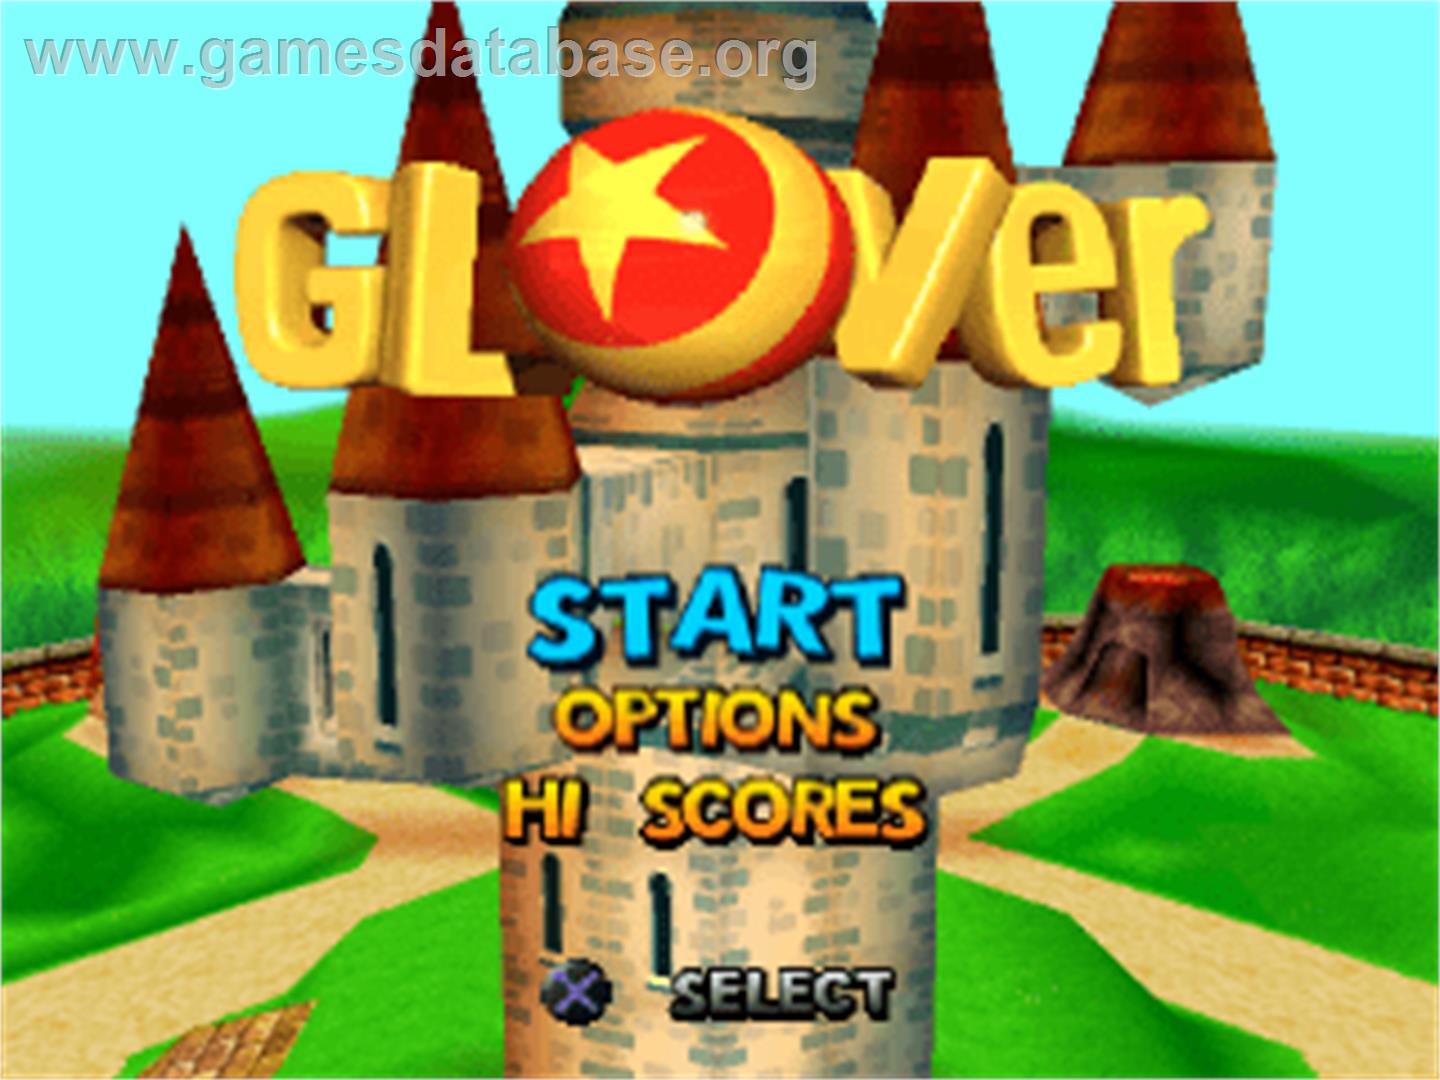 Glover - Sony Playstation - Artwork - Title Screen